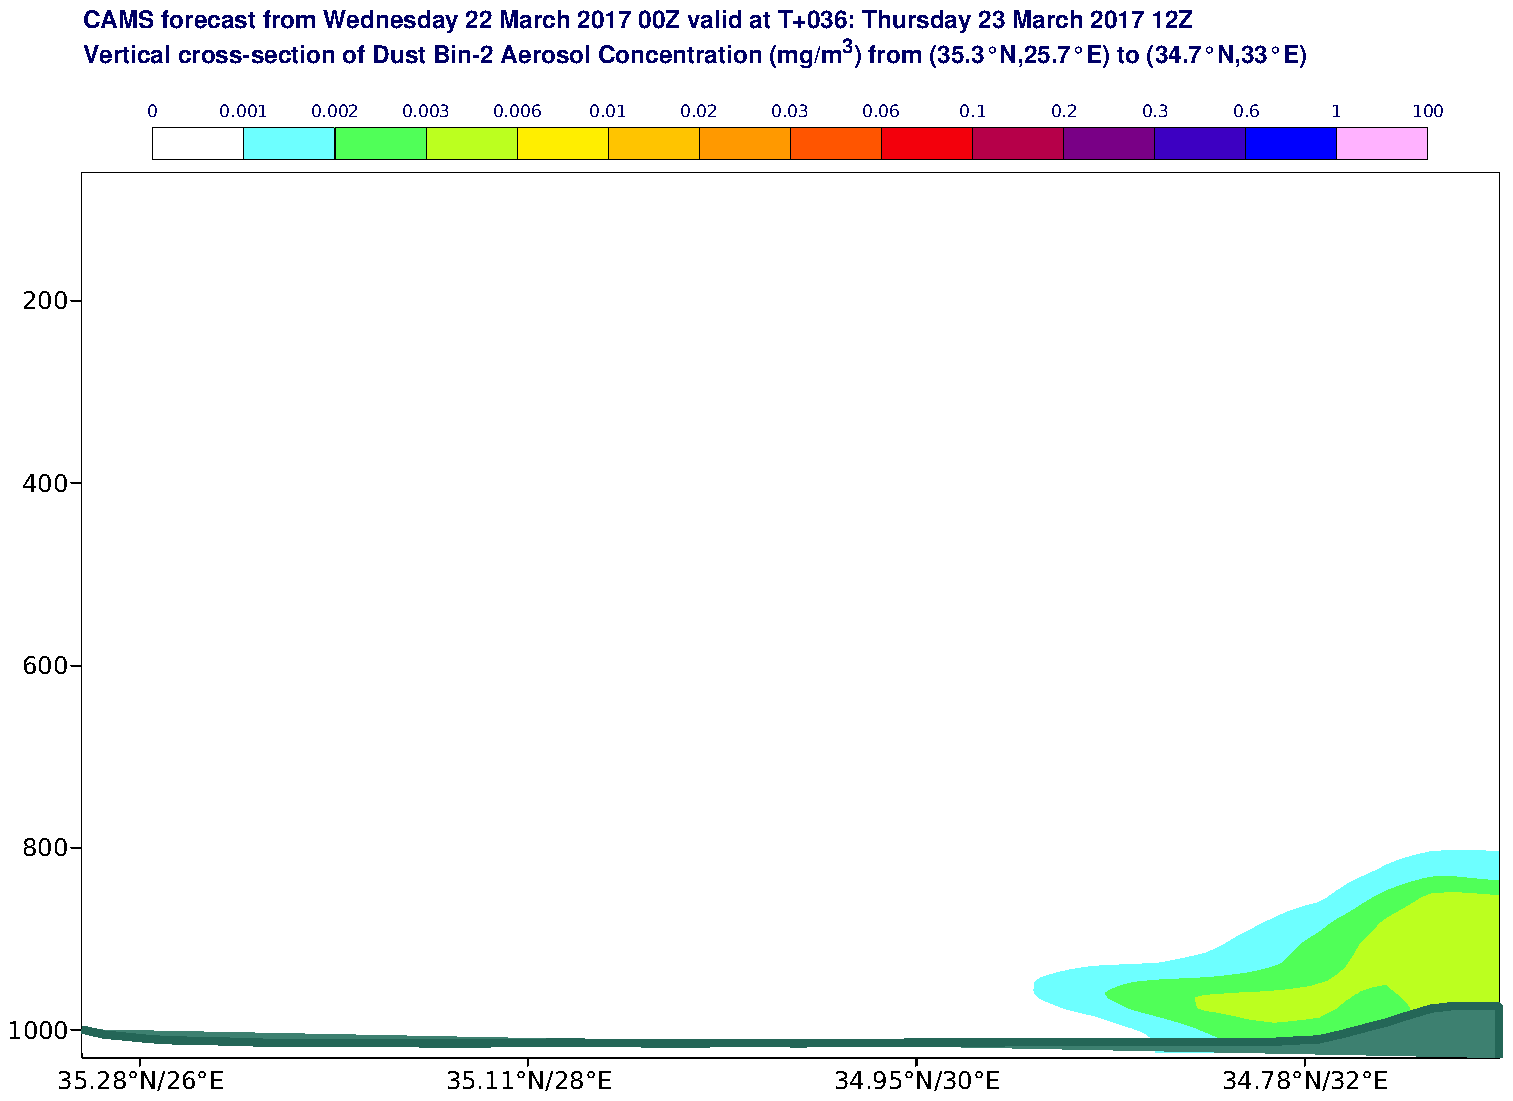 Vertical cross-section of Dust Bin-2 Aerosol Concentration (mg/m3) valid at T36 - 2017-03-23 12:00